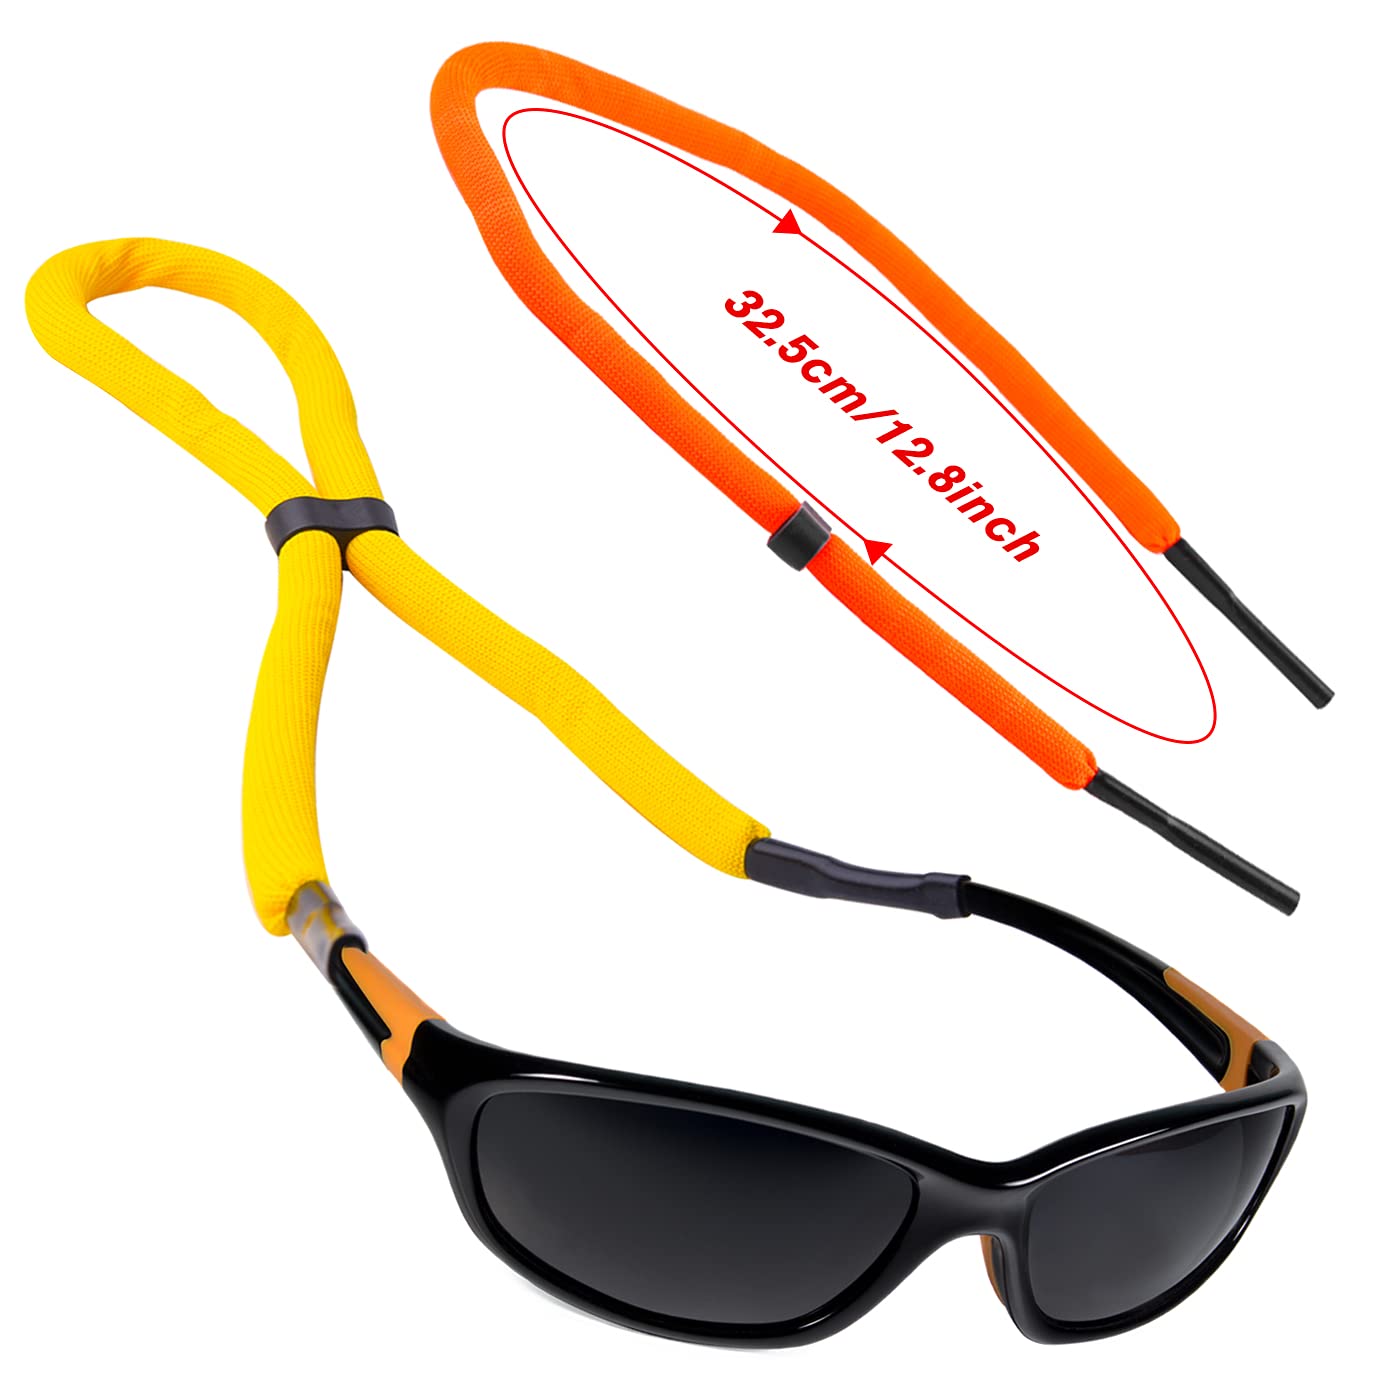 WXJ13 8 Pieces Floating Sunglass Strap Adjustable Sunglasses Straps Glasses Float Adjustable Eyewear Retainer Safety Outdoor Eyeglass Rope for Sport Swimming Men Women, 8 Color